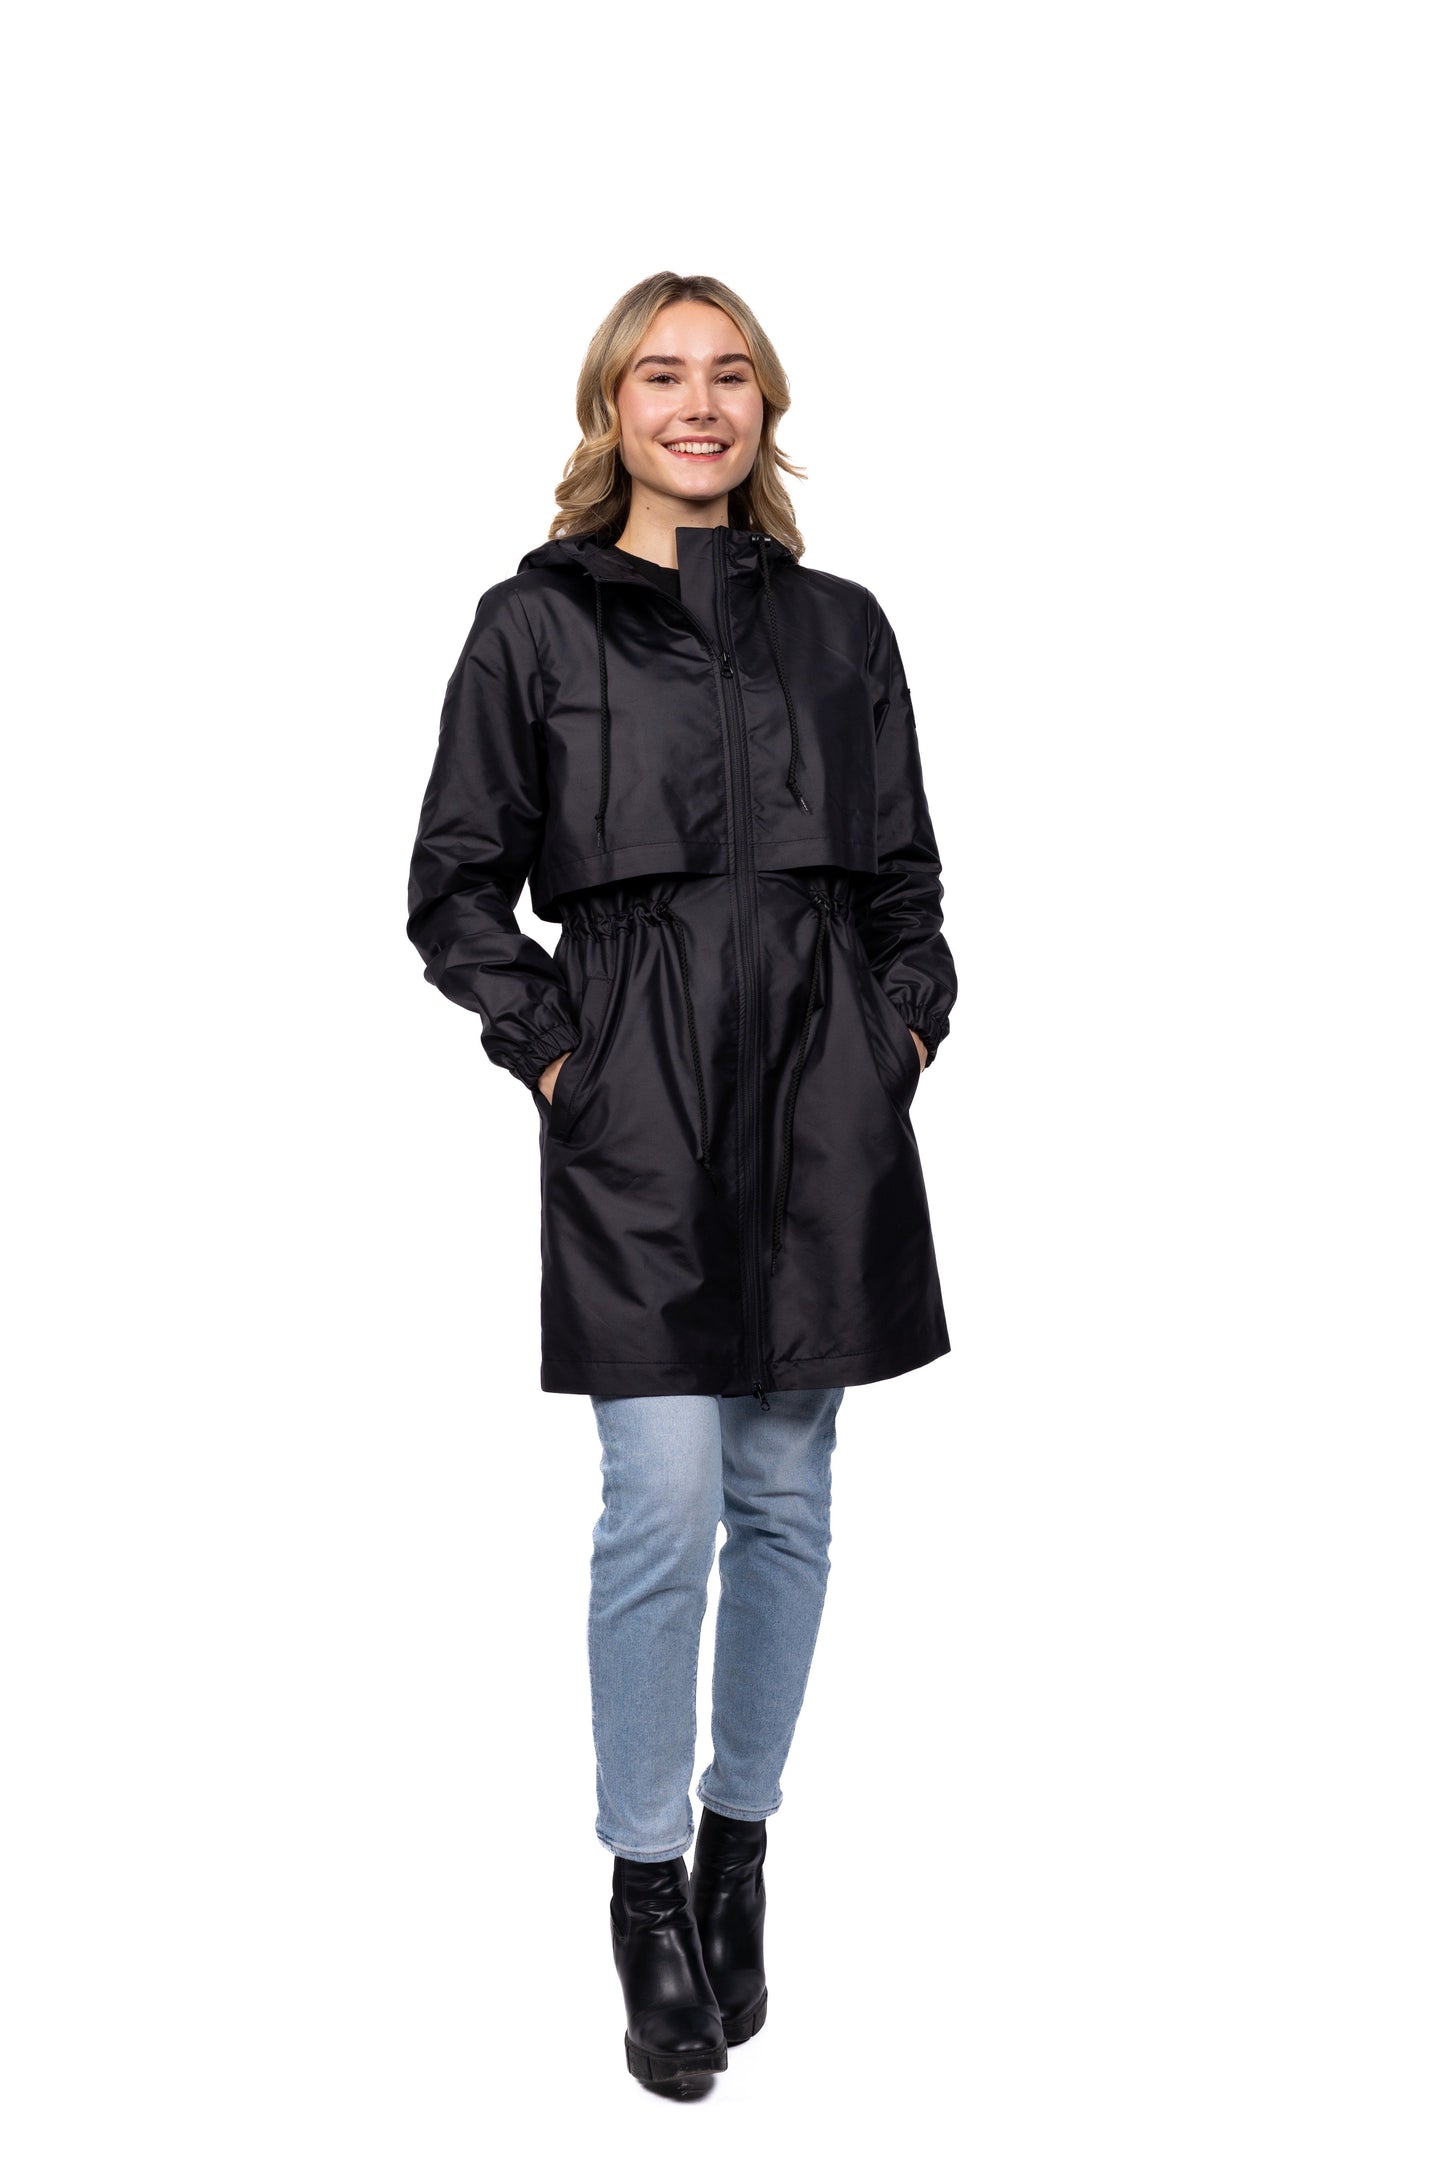 Desloups urban waterproof coat with hood, fitted for women - Purple 